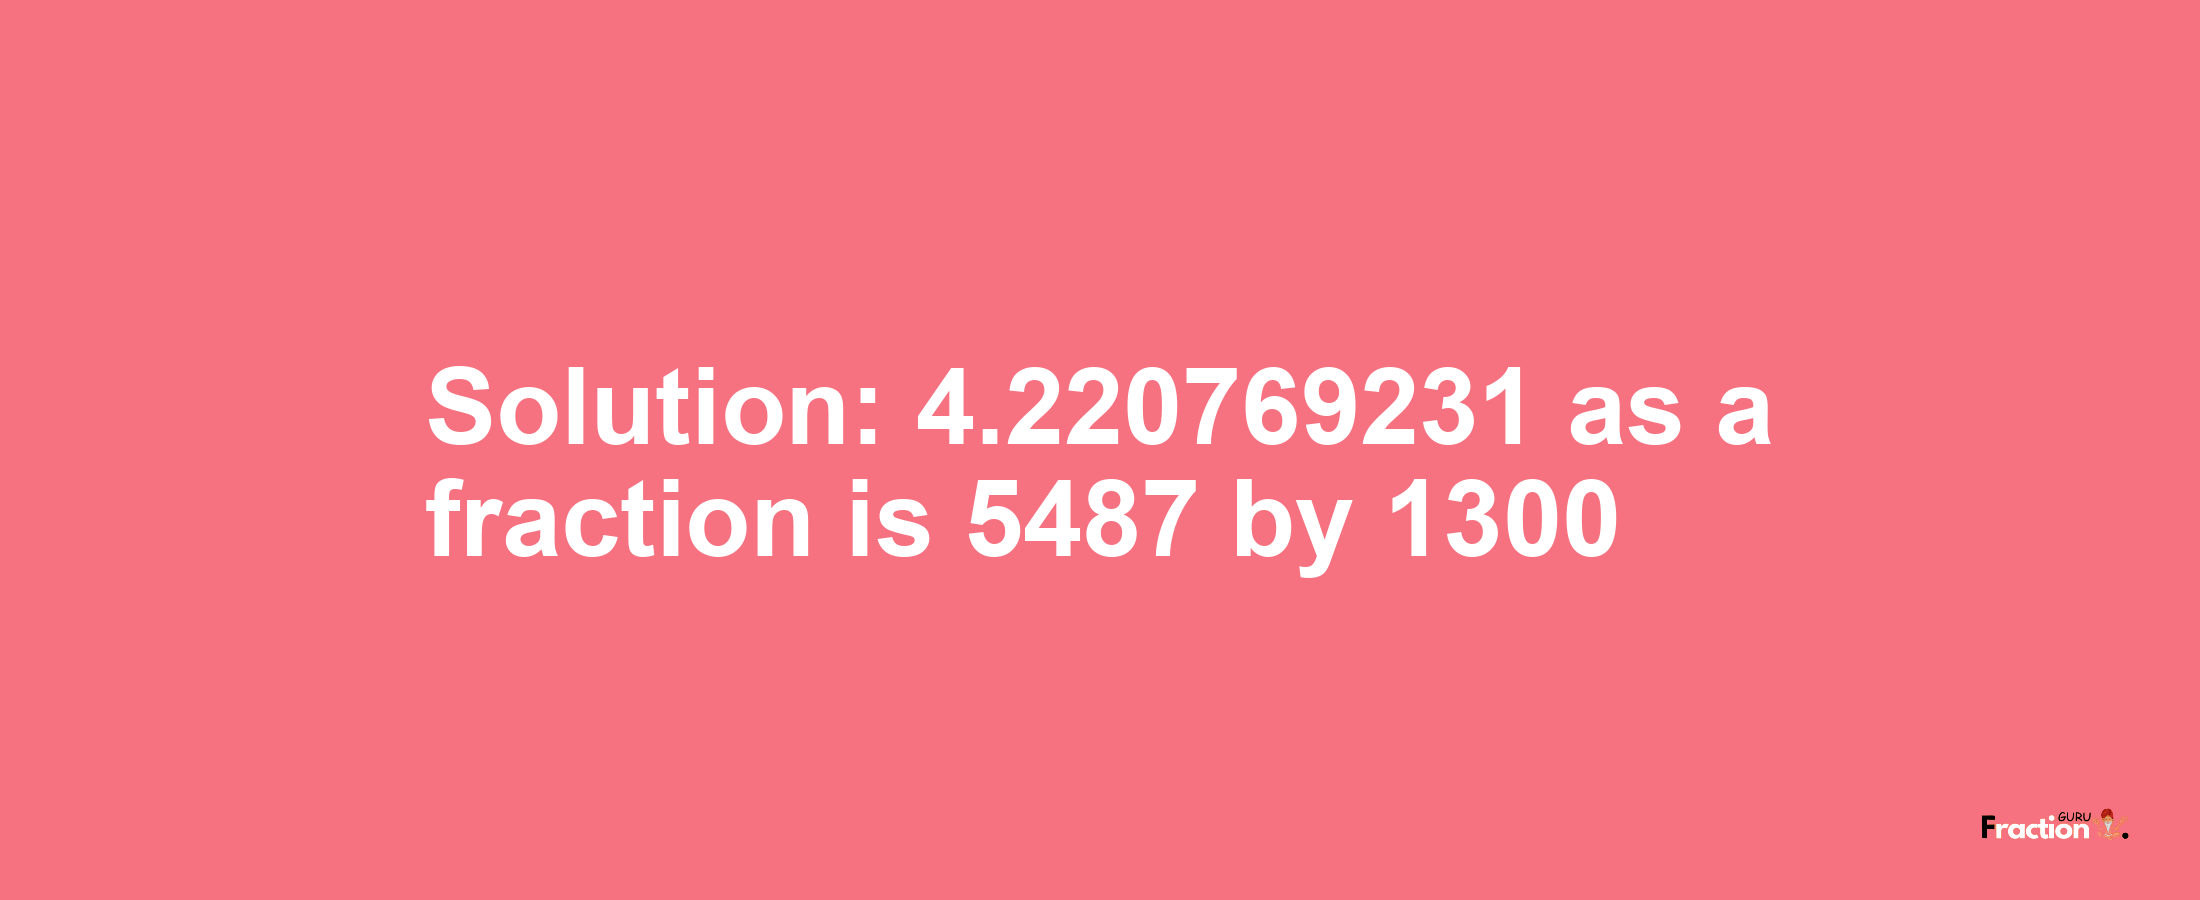 Solution:4.220769231 as a fraction is 5487/1300